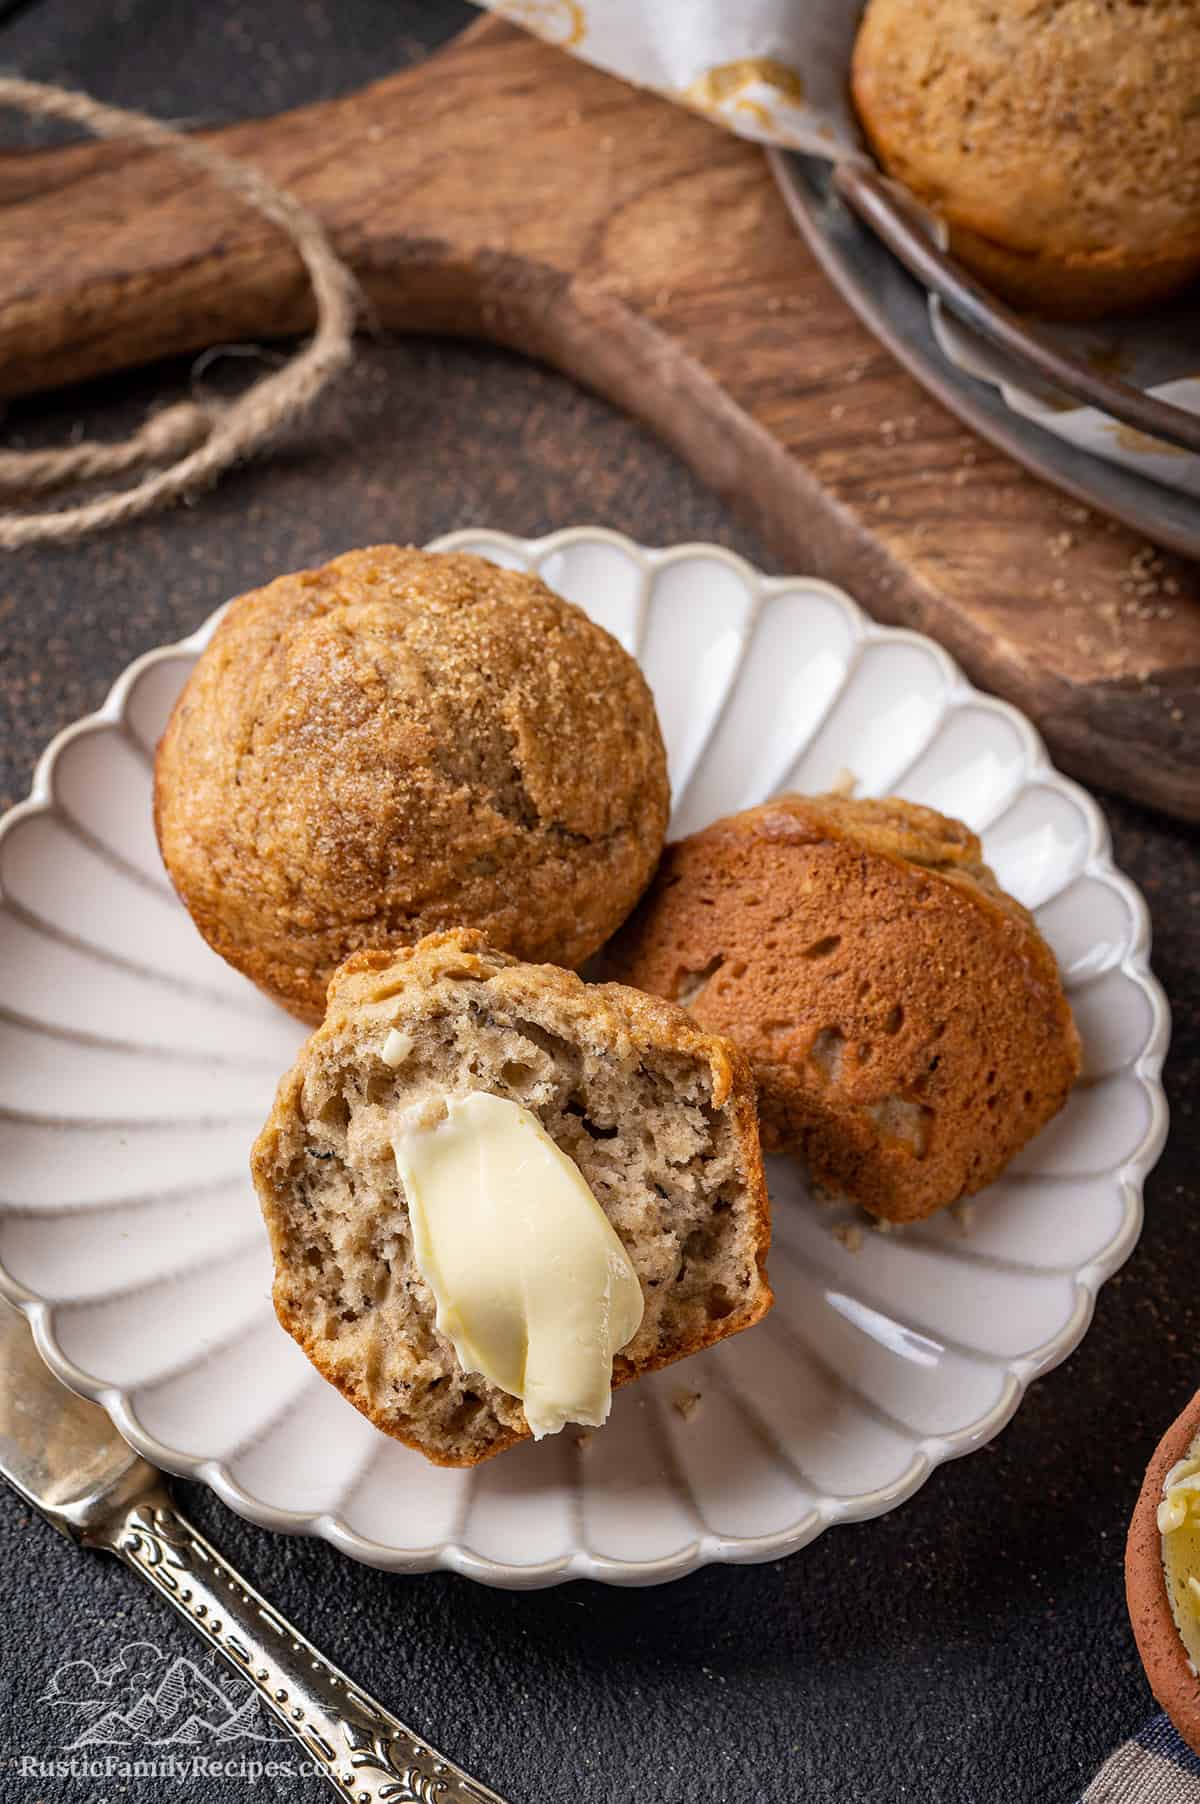 One half of a banana bread muffin spread with butter on a plate next to its other half, and a whole banana muffin.